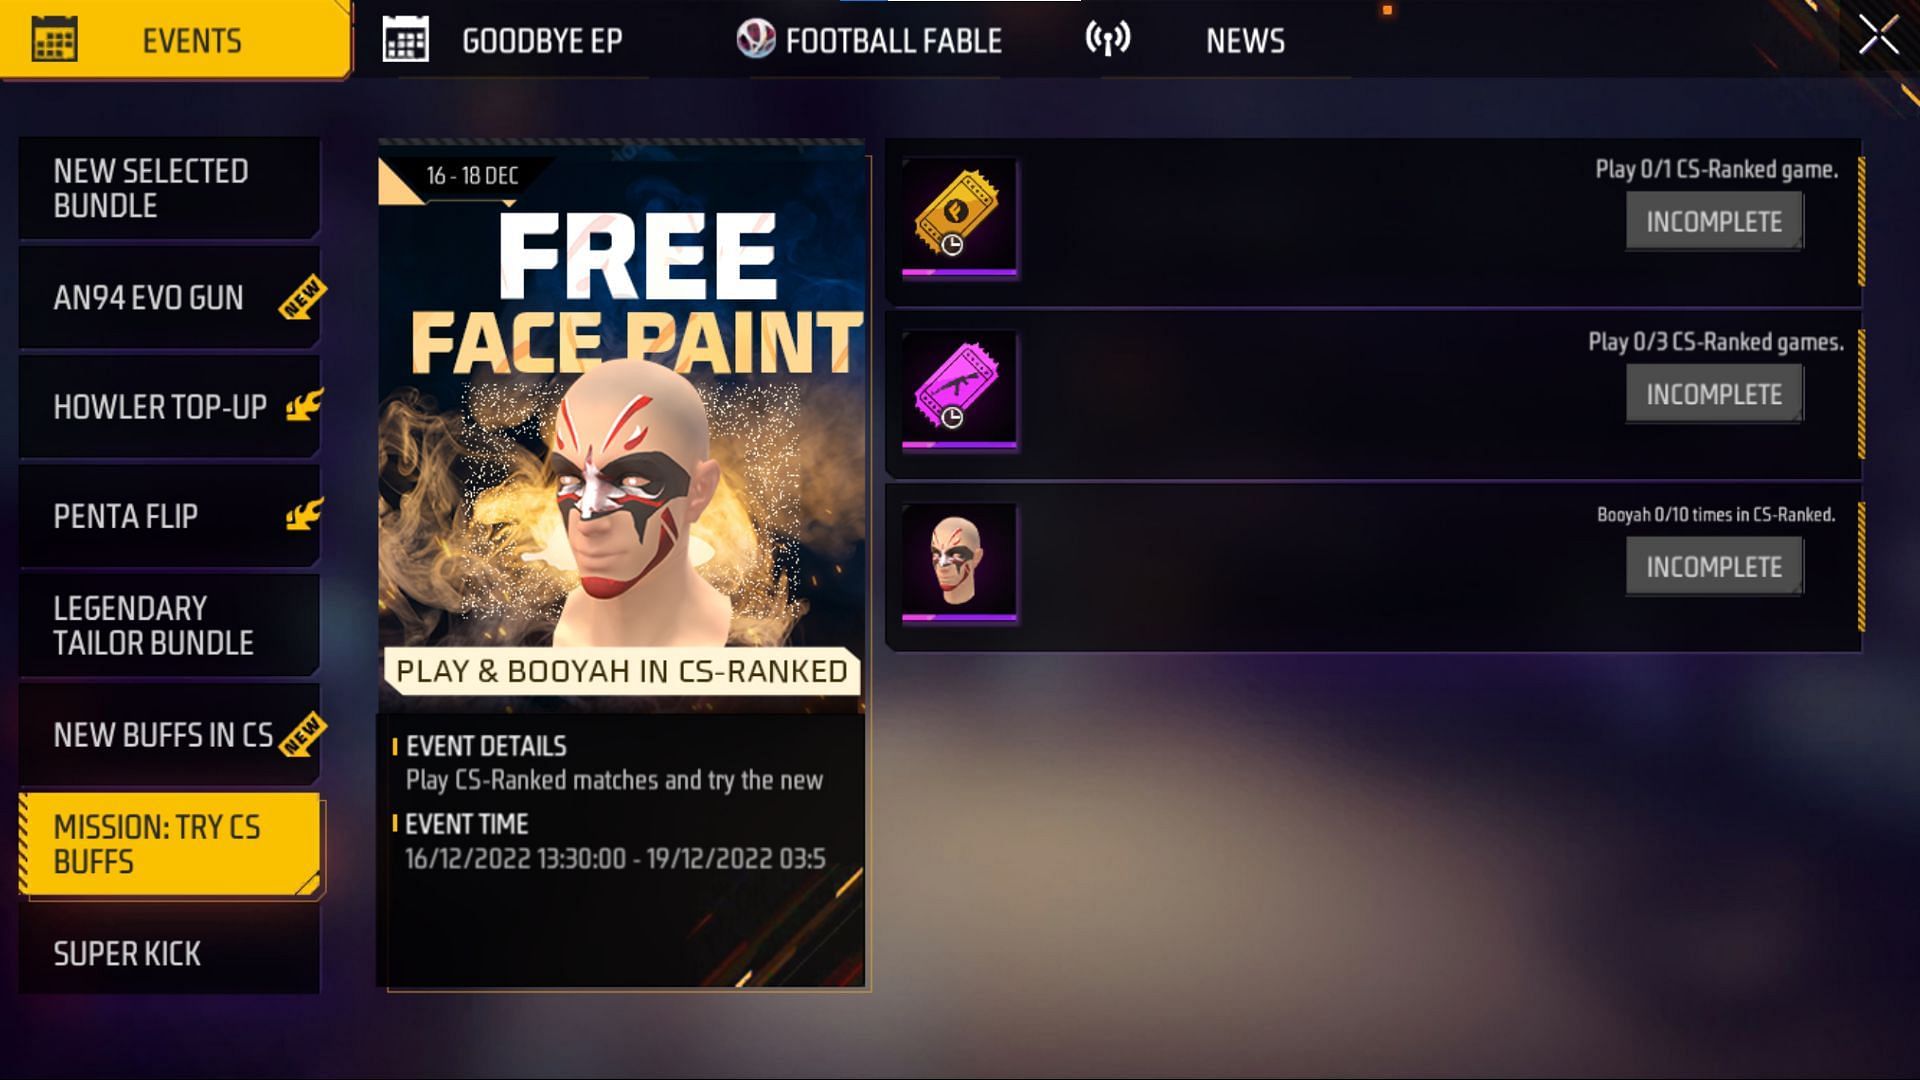 This new event commenced yesterday and rewards free face paint (Image via Garena)